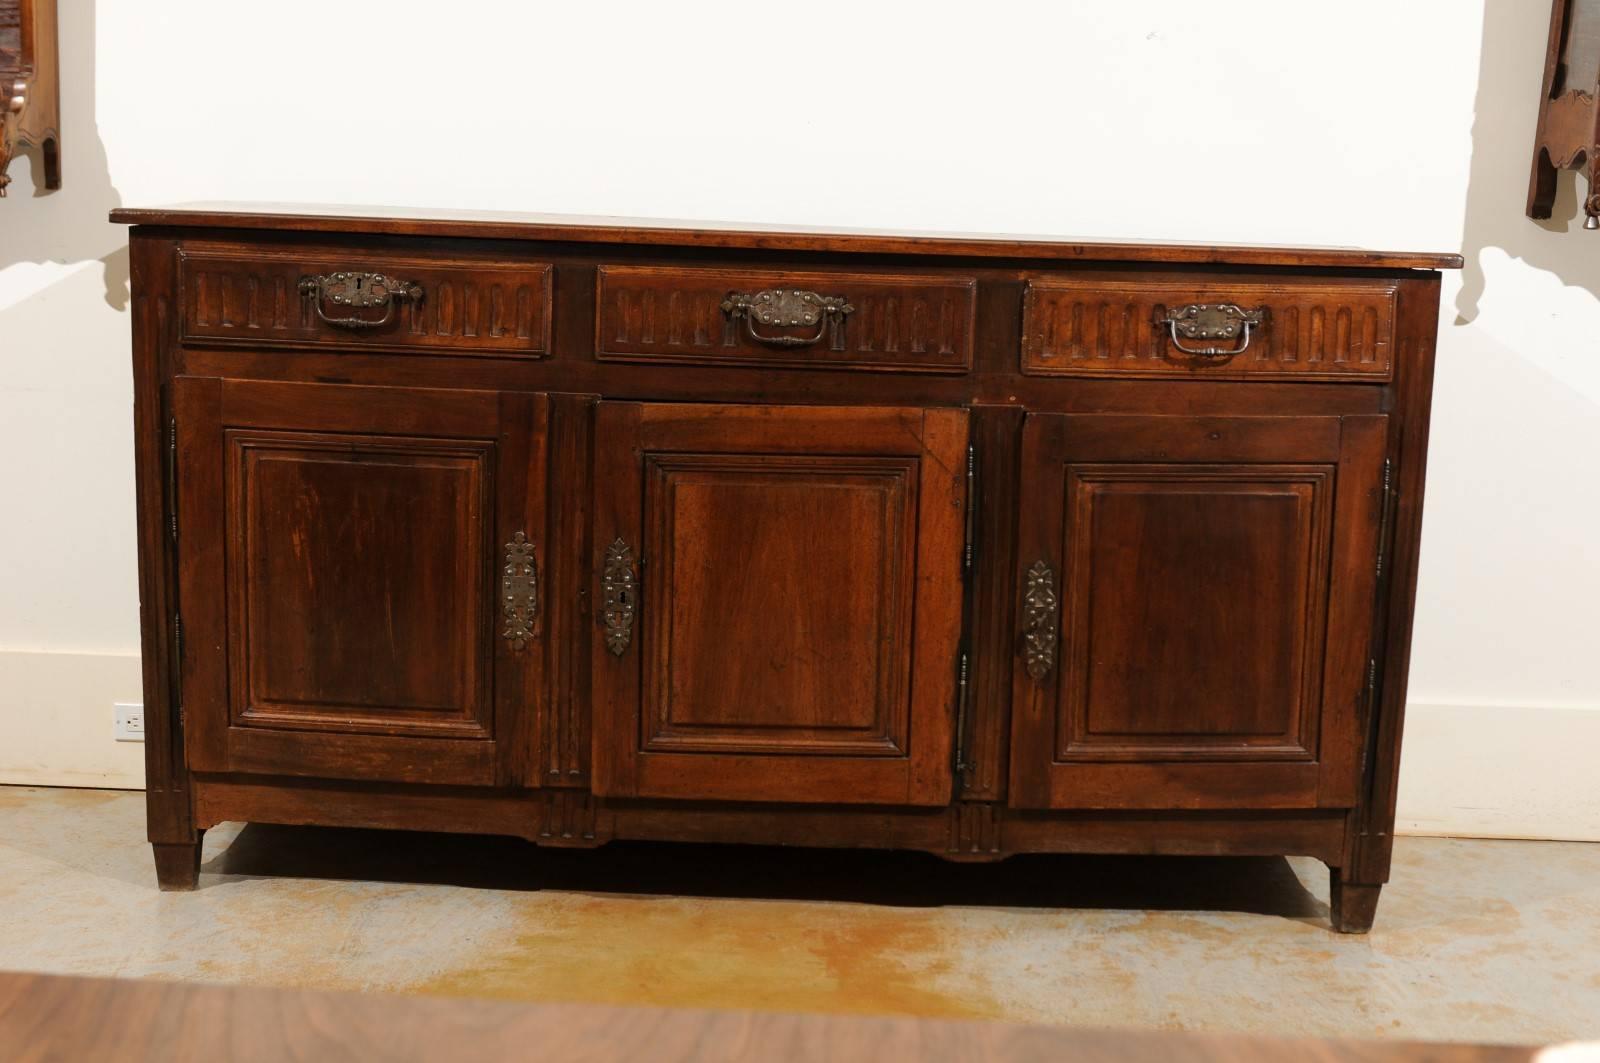 A French period Louis XVI walnut enfilade with three drawers over three doors from the late 18th century. This French long buffet features a rectangular top sitting above three hand-cut dovetailed drawers adorned with fluted patterns and exquisite